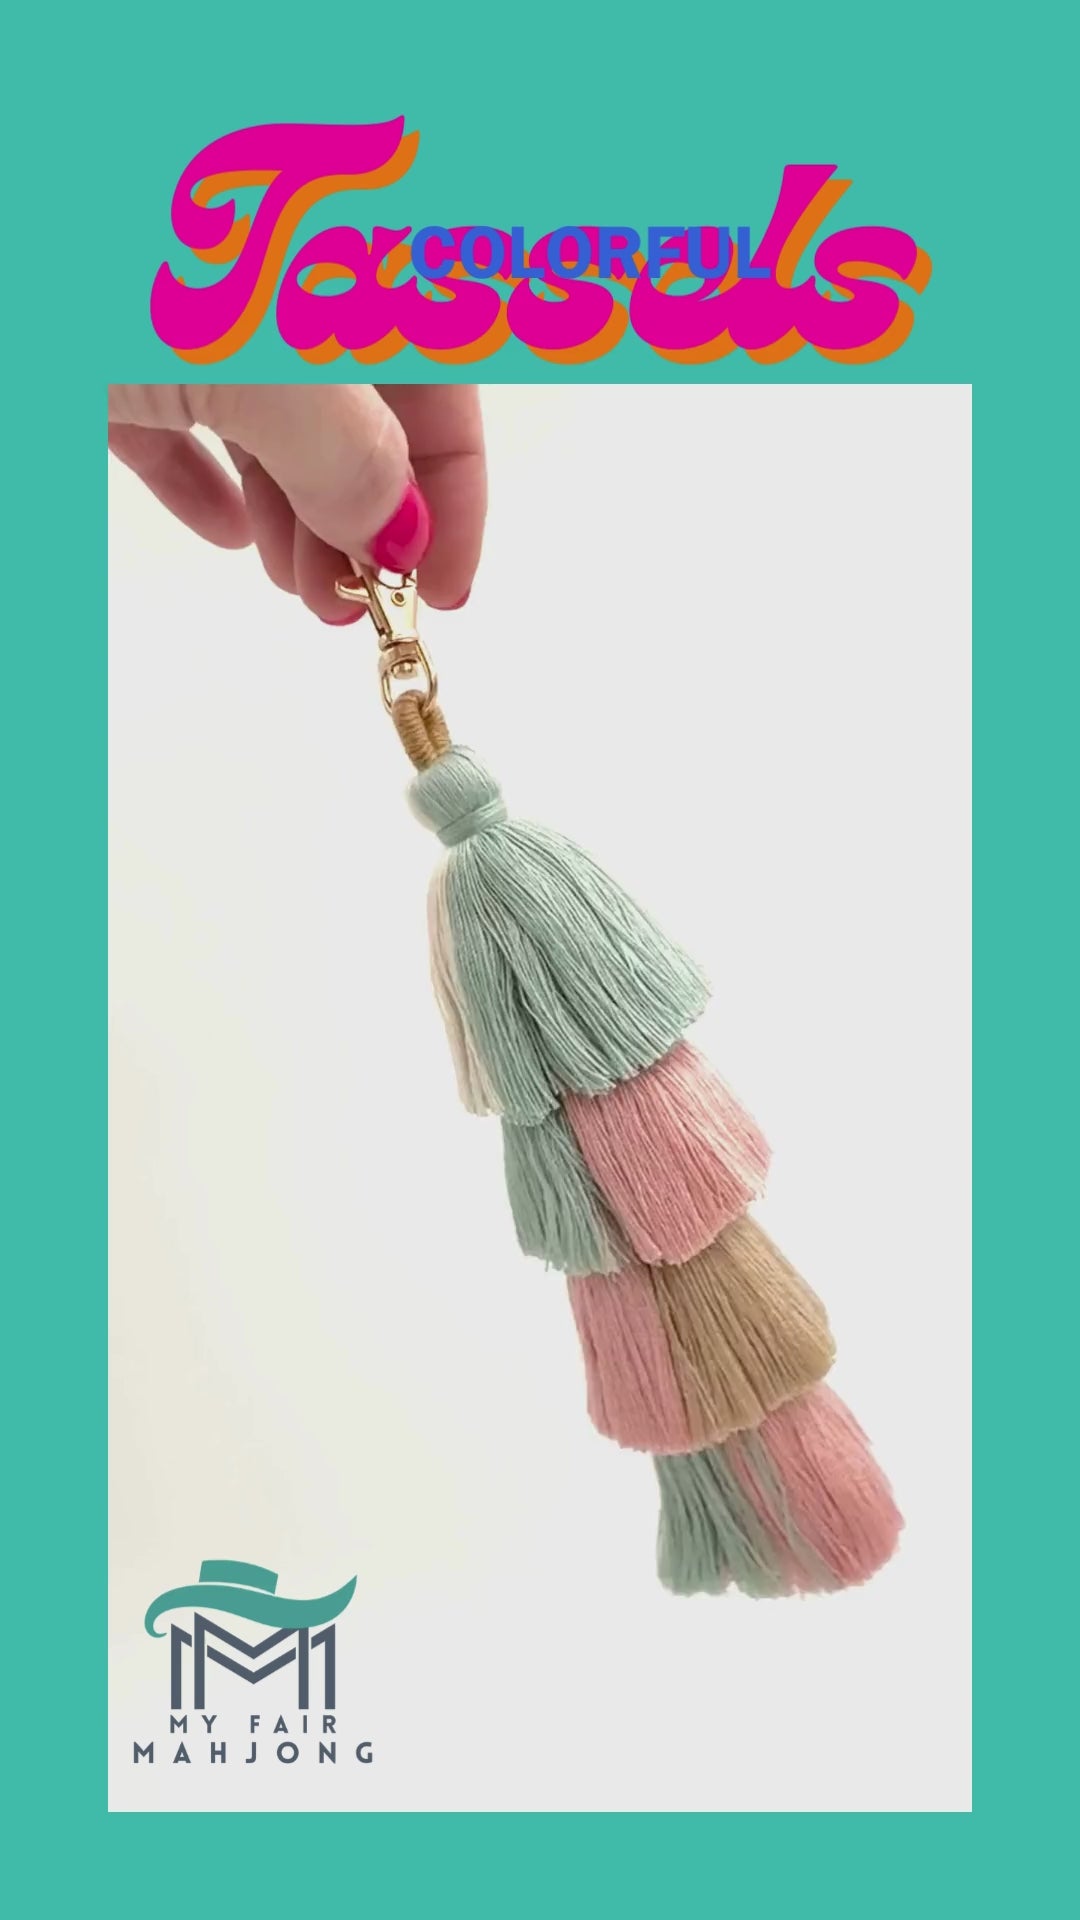 Green Pink purple red blue green multi color multi layer tassel zipper tag purse decoration for mah jongg tile bags Tassle- Key Chain or Mahjong Tile Carrying Bag Accessory